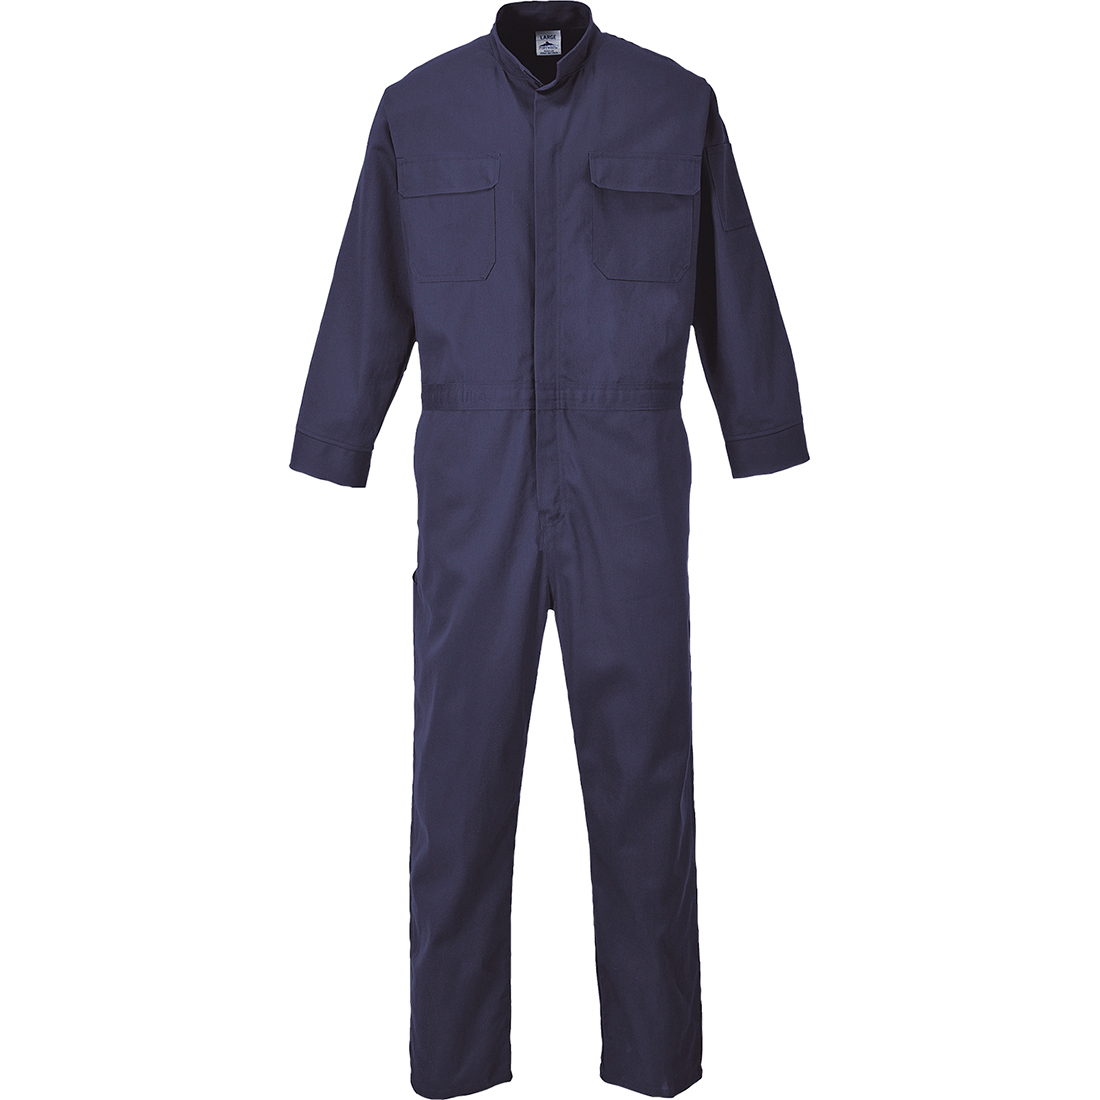 Bizflame 88/12 Coverall, Navy       Size Medium R/Fit